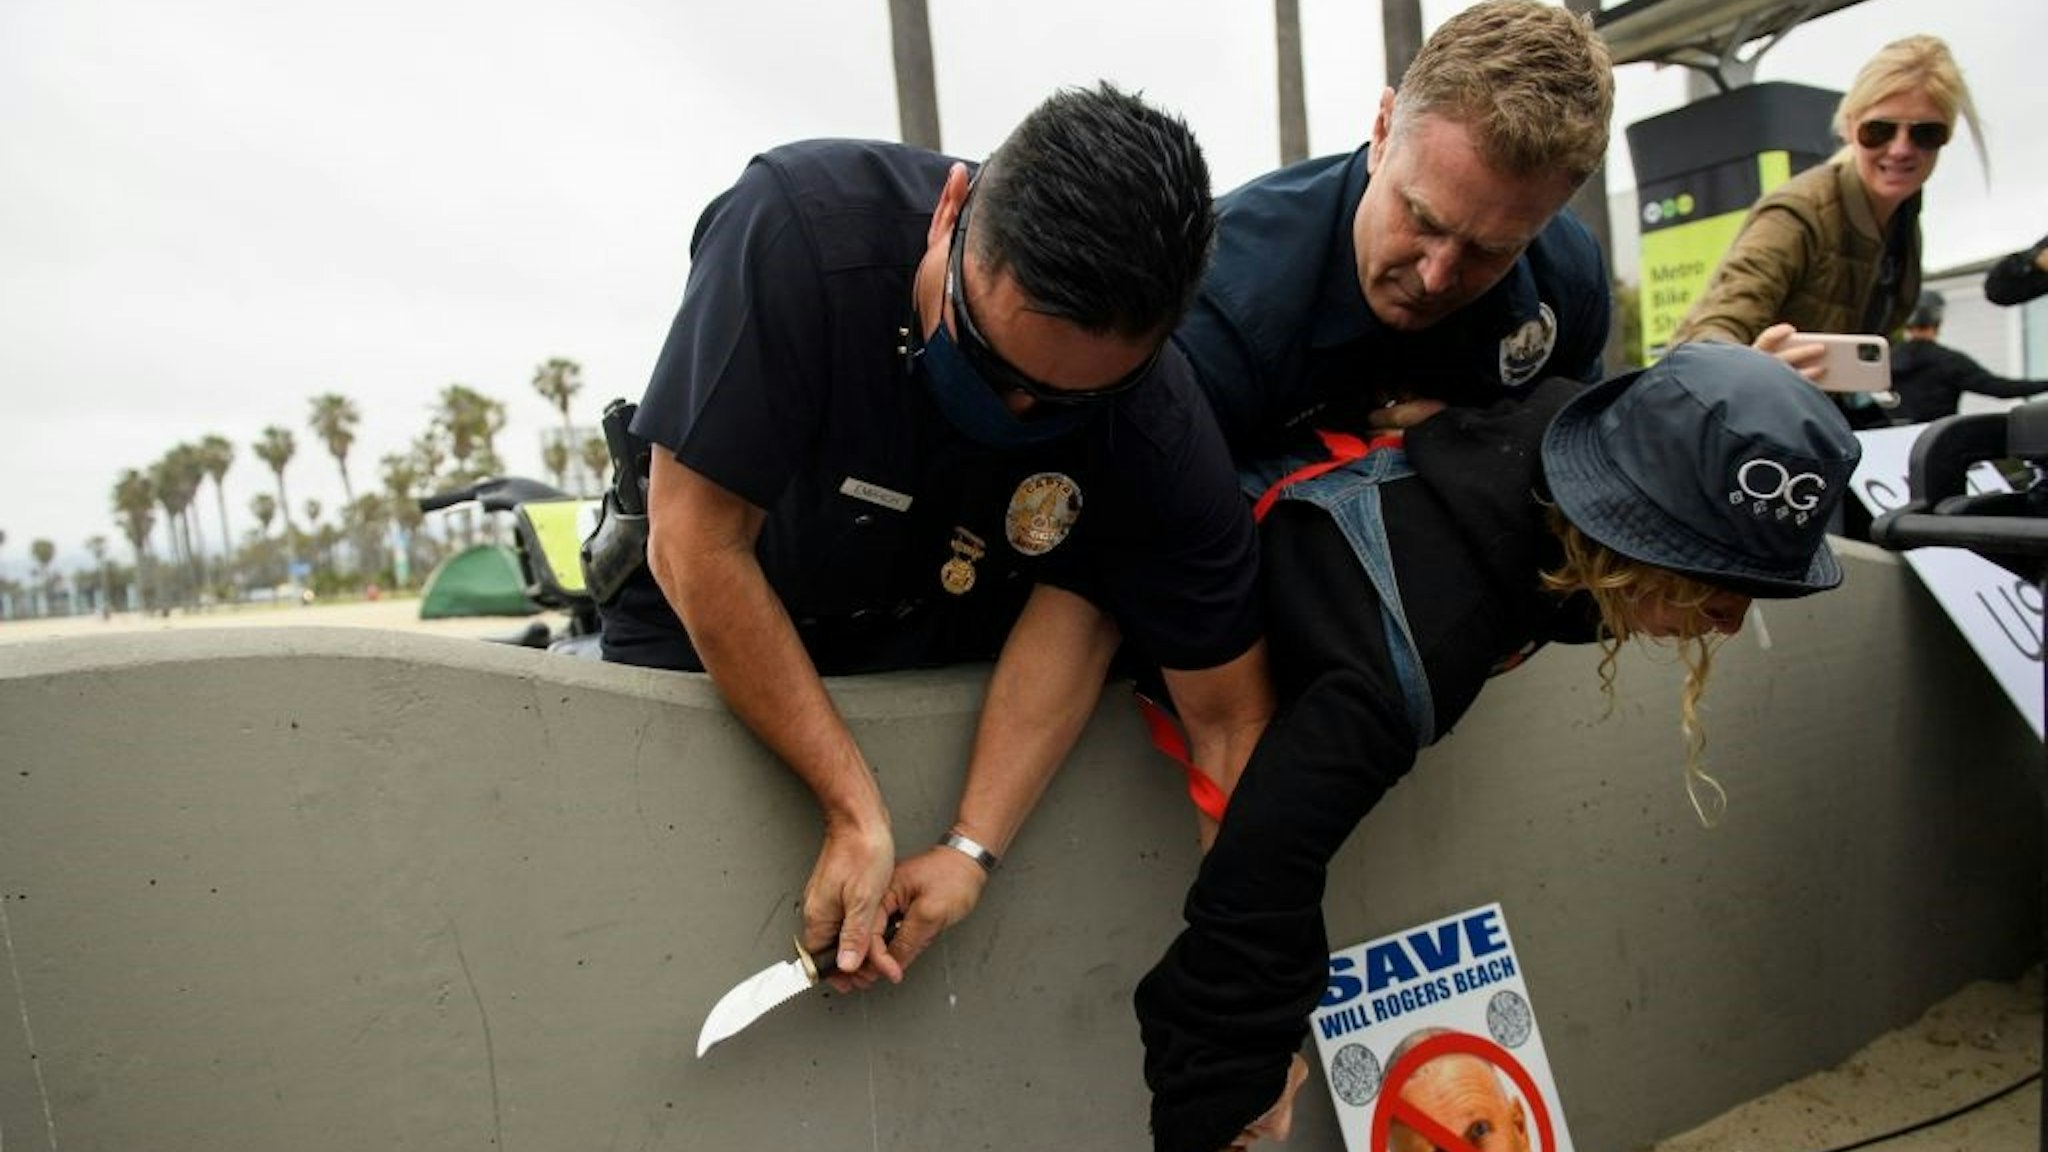 Los Angeles Police Department (LAPD) offices wrestle a knife away from a person experiencing homelessness as they were detained during an event with Los Angeles City Council Member and mayoral candidate Joe Buscaino announcing his "Plan For A Safer Los Angeles" at Venice Beach on June 7, 2021 in Los Angeles, California.